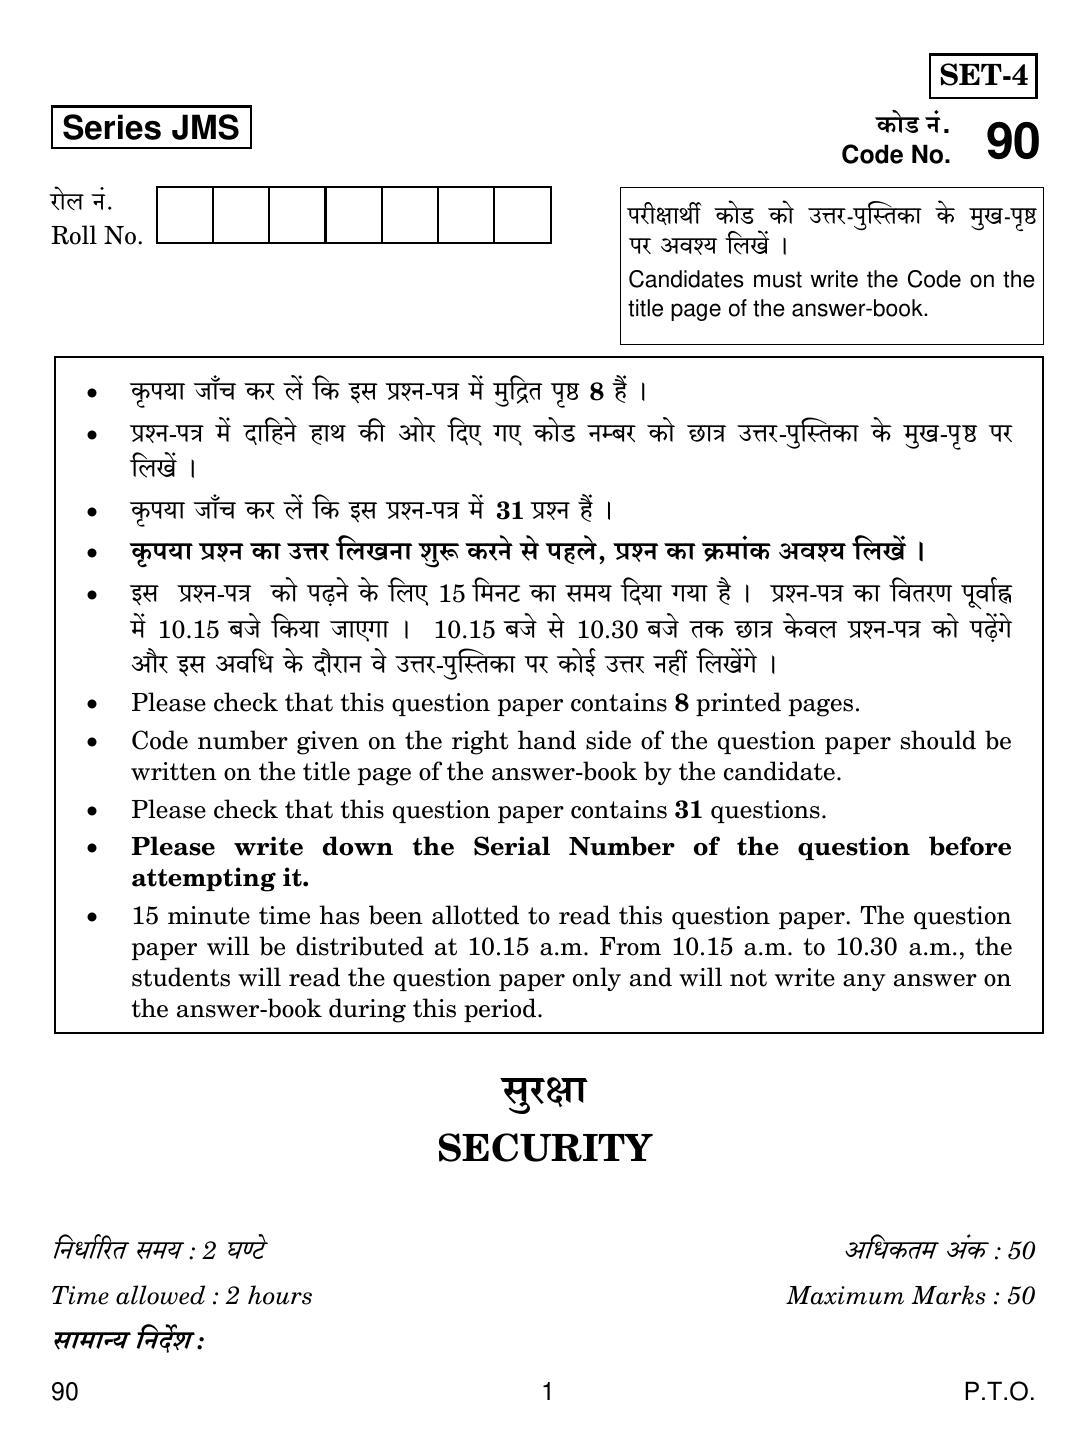 CBSE Class 10 90 SECURITY 2019 Question Paper - Page 1